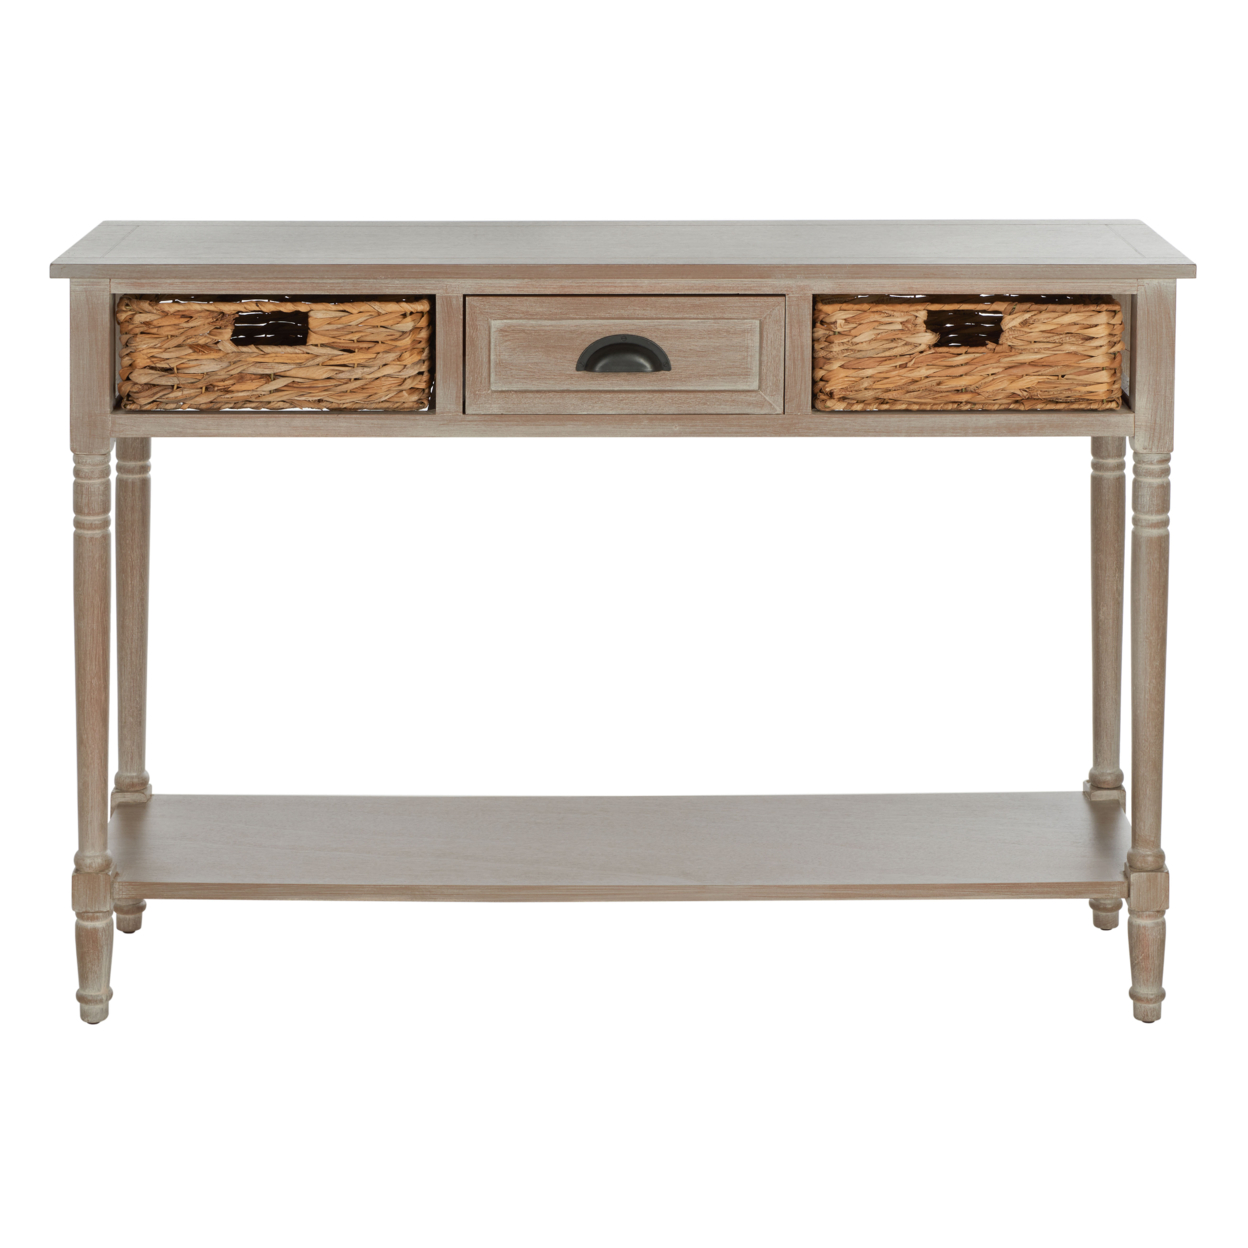 SAFAVIEH Christa Console Table With Storage White Washed